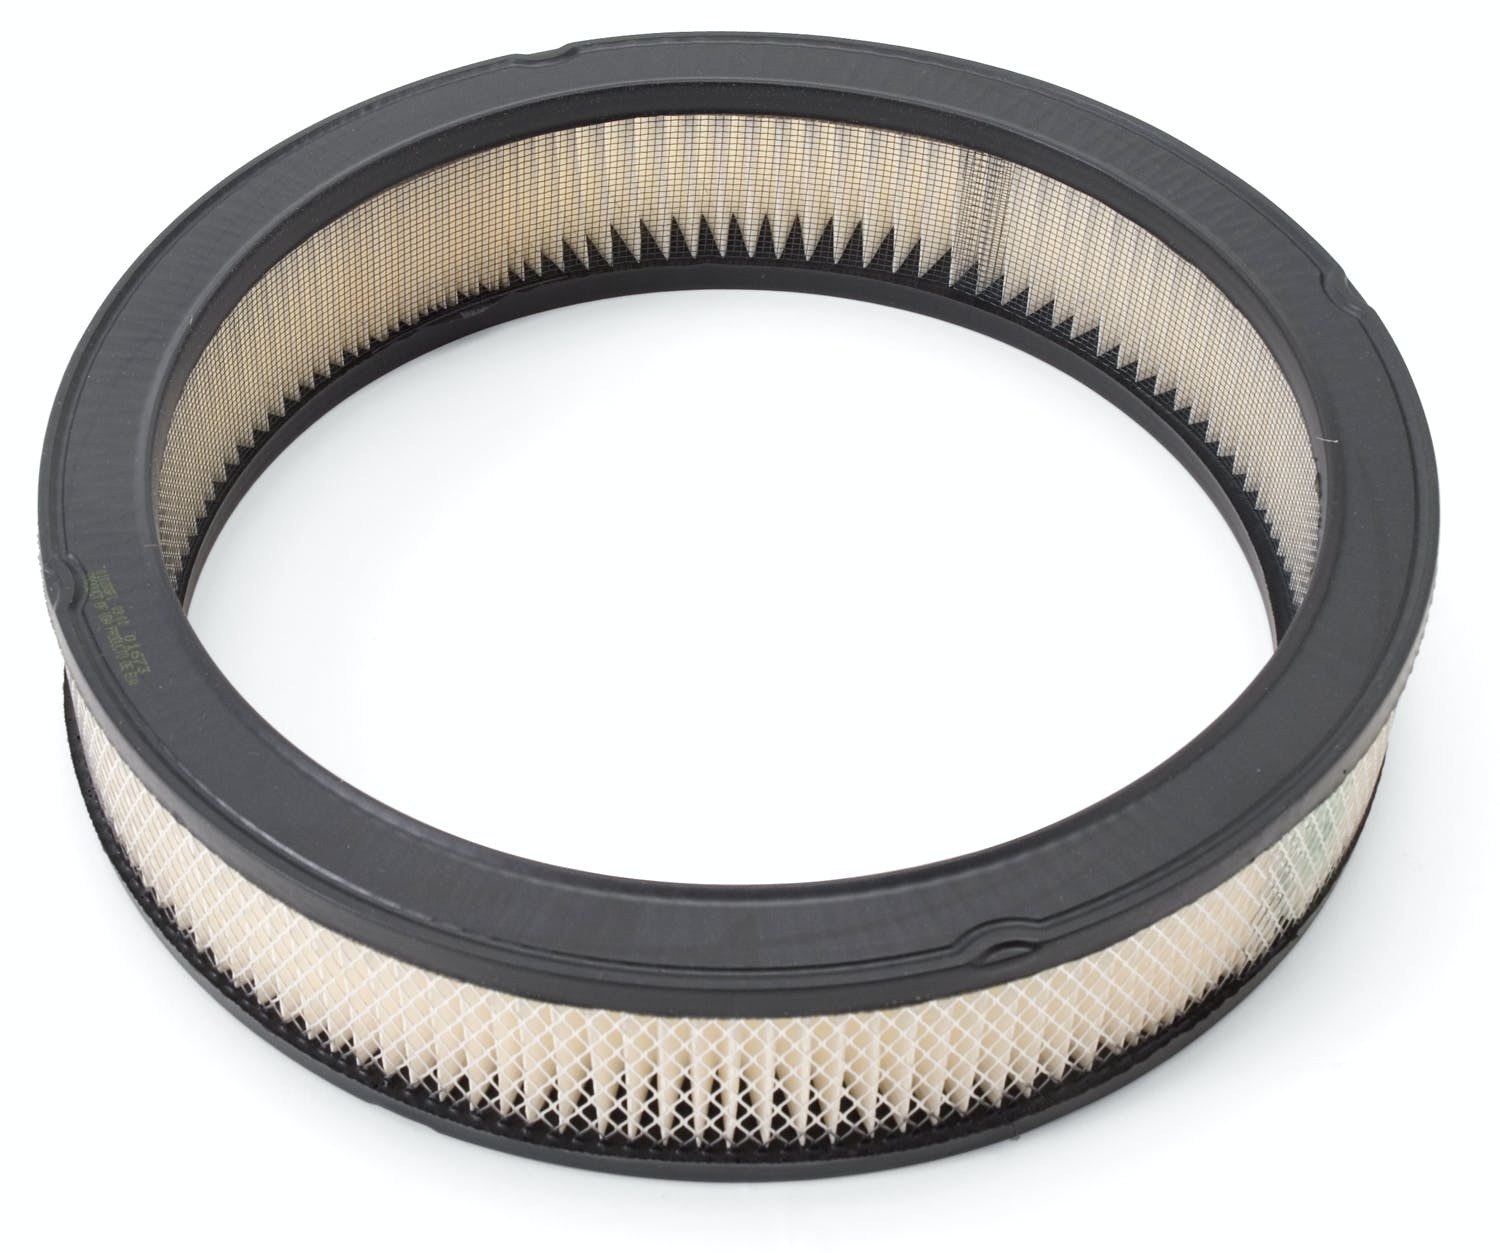 Edelbrock 1217 Replacement Paper Air Filter for Elite Series 14 Round Air Cleaners